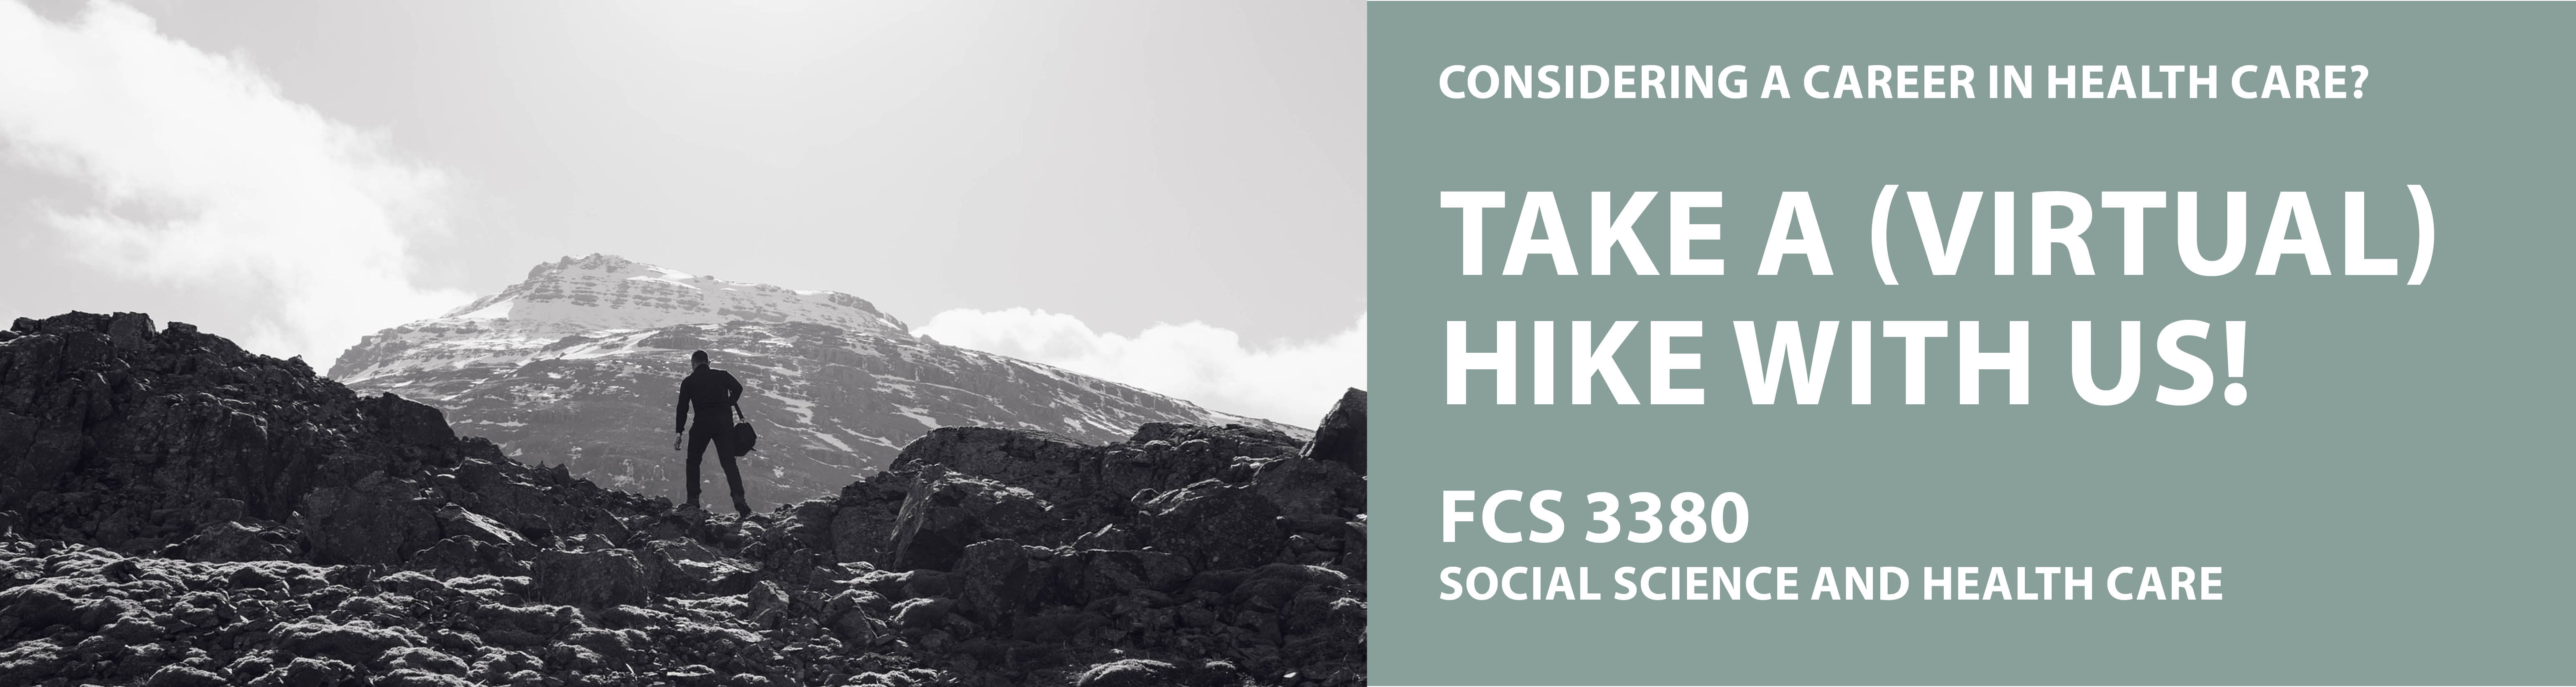 fcs 3380 social science and health care